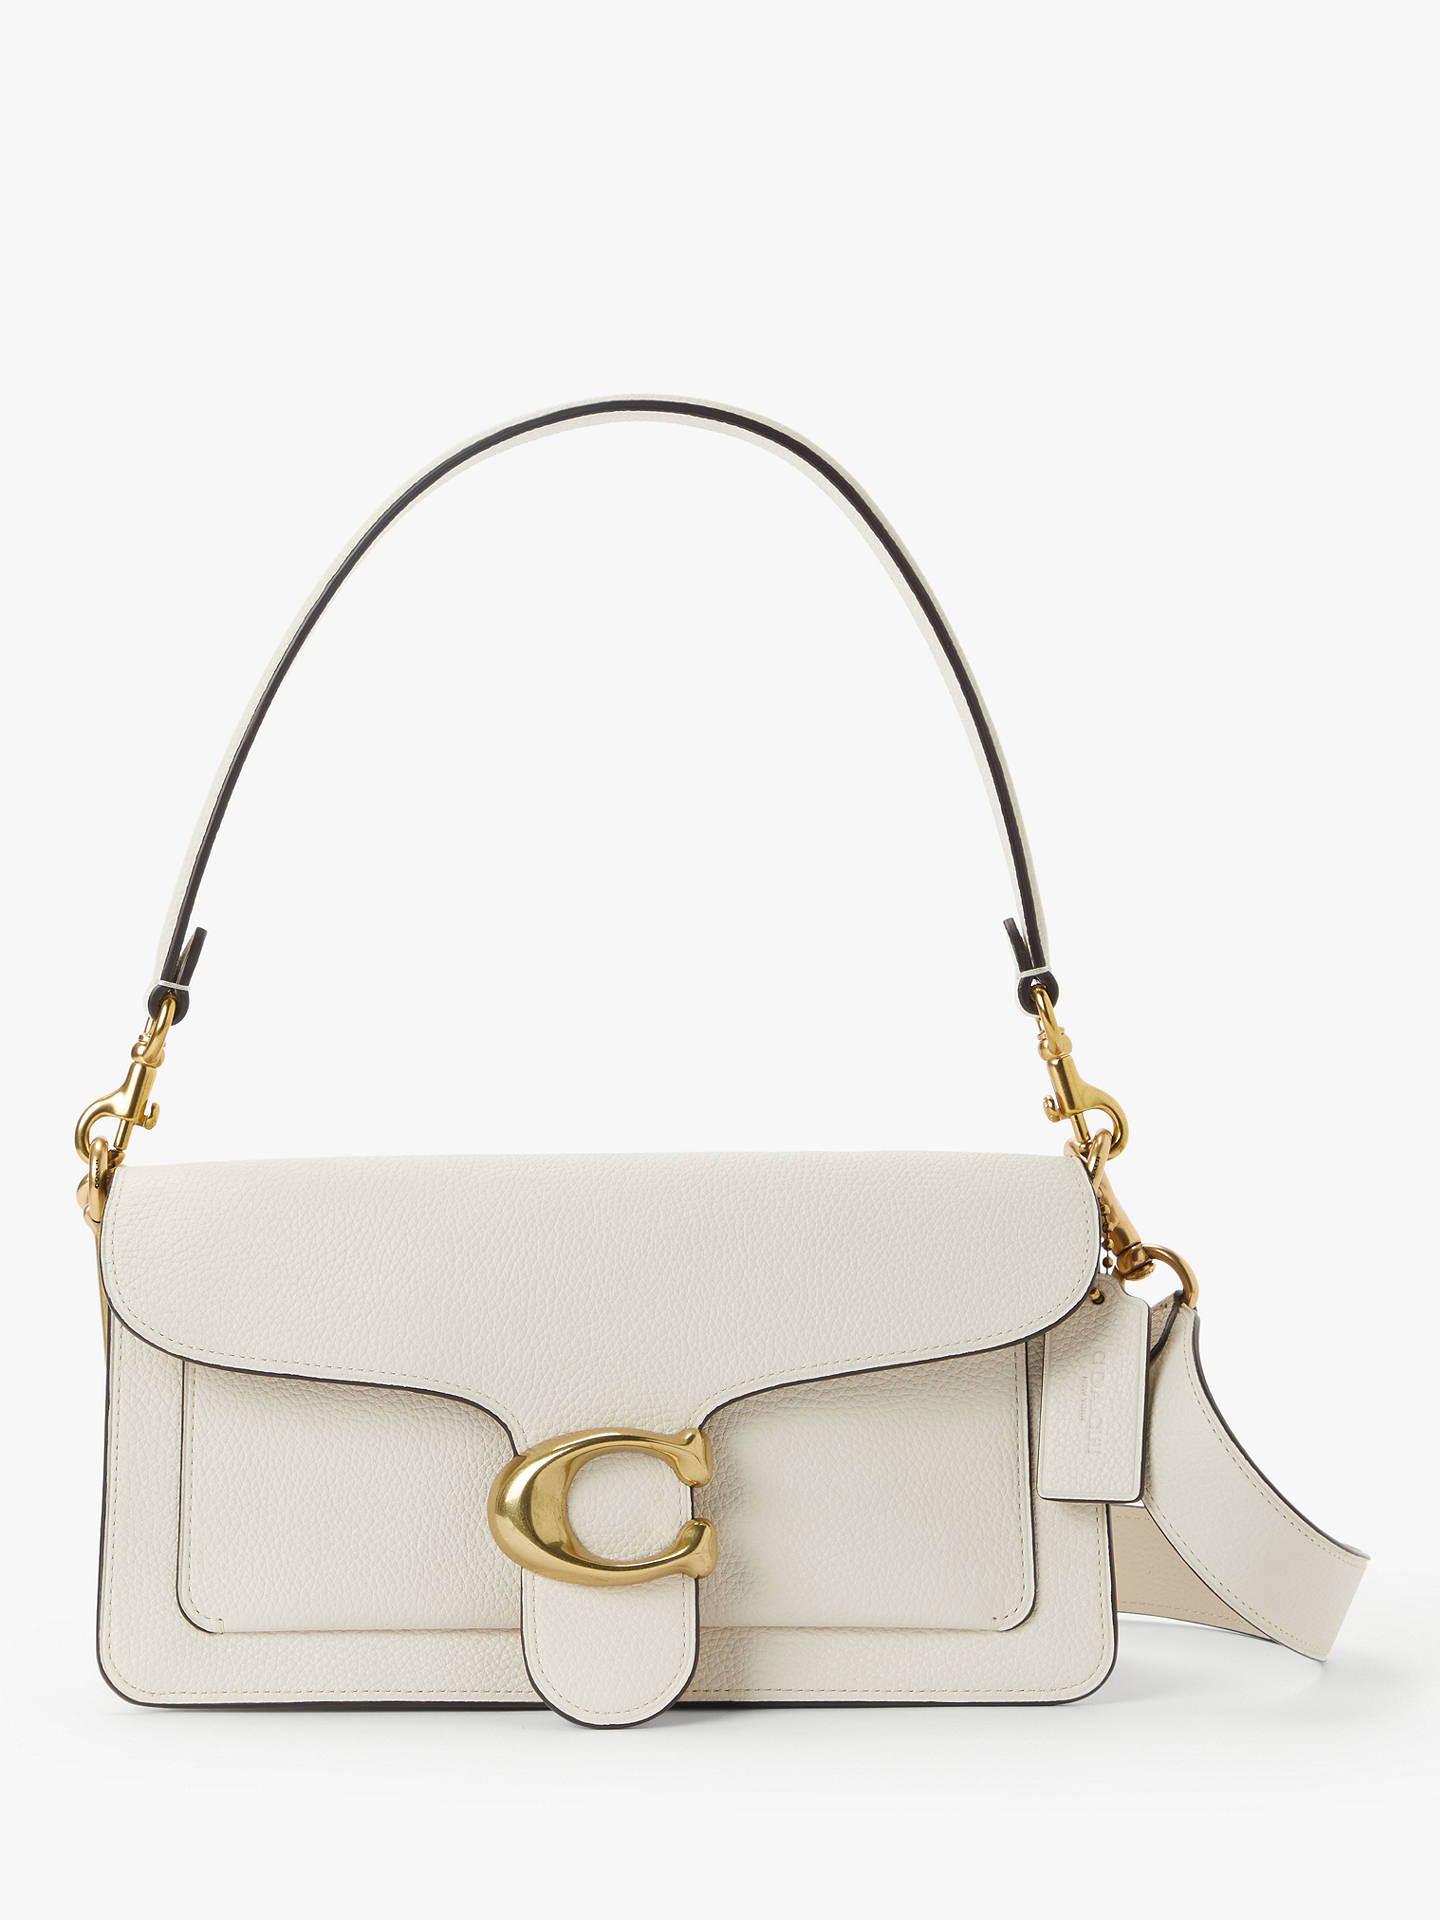 Coach Tabby 26 Leather Shoulder Bag at John Lewis & Partners